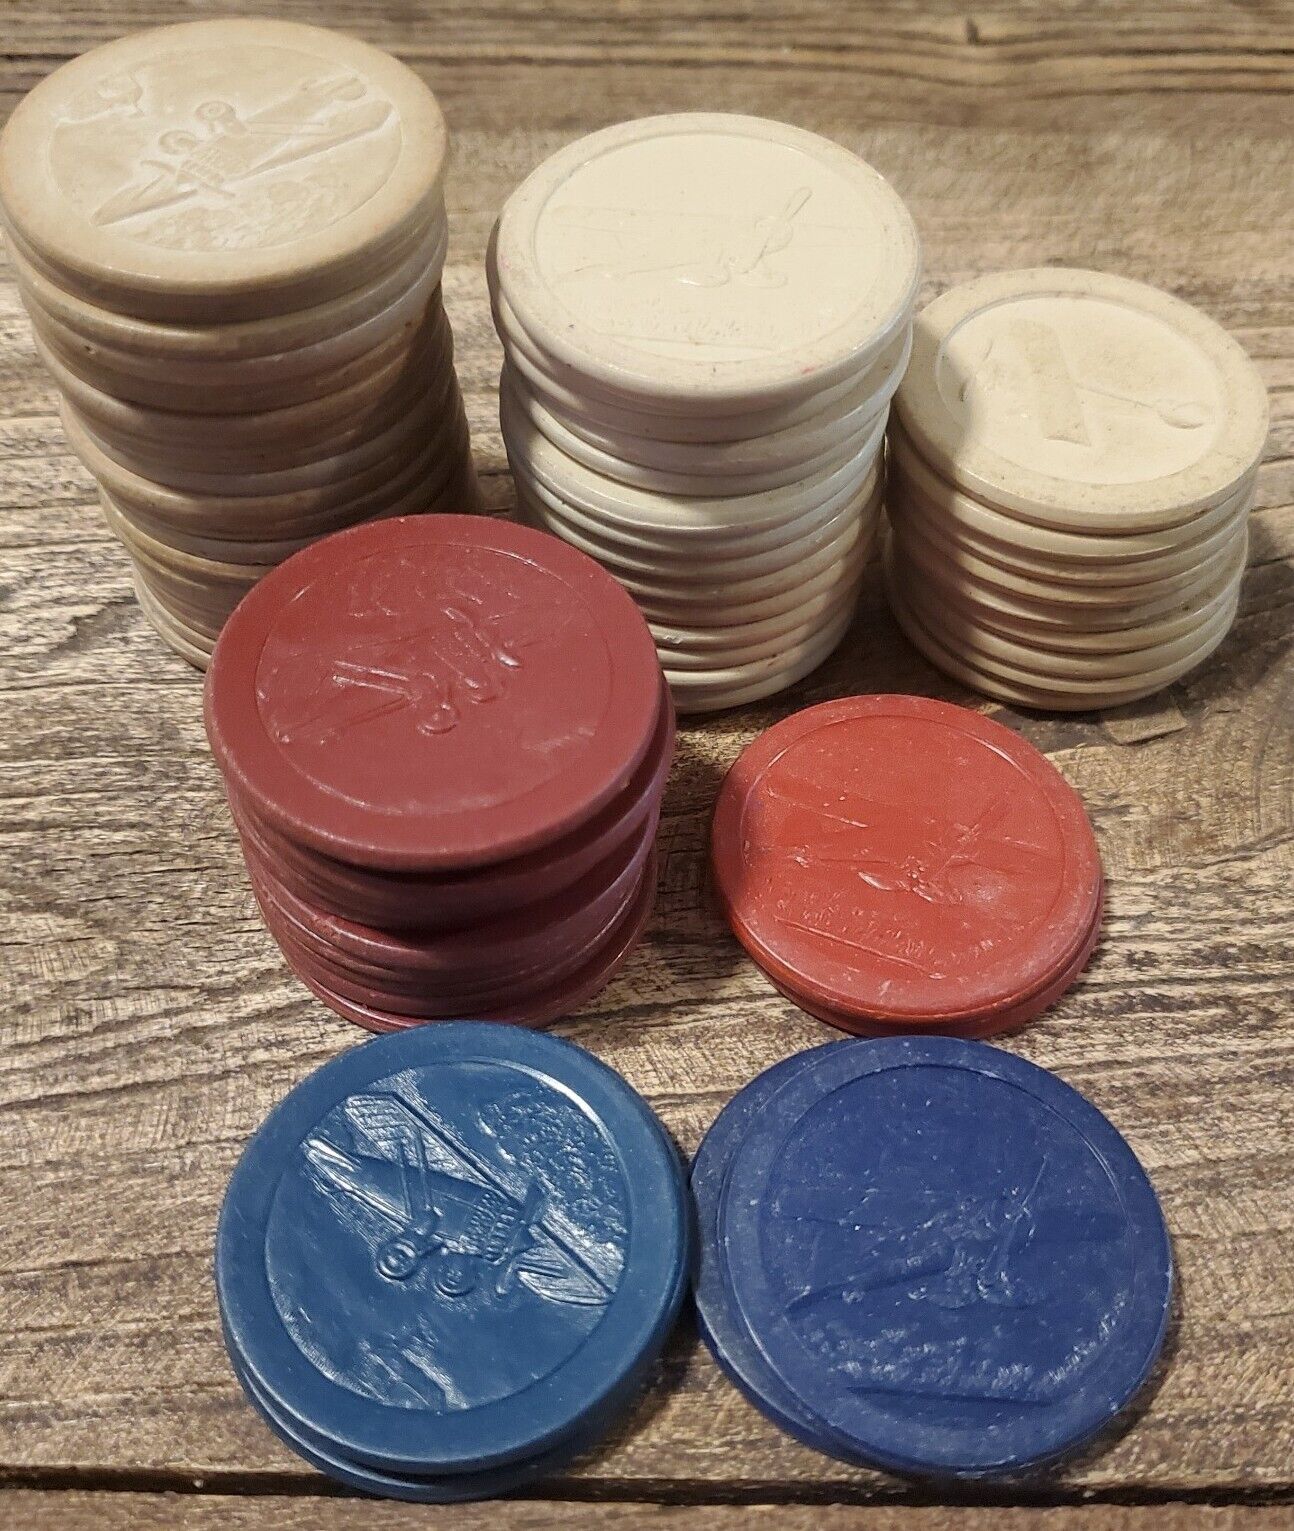 Lot of 60 Rare Old Antique Poker Chips Airplane Spirit Plane Clay Vintage 